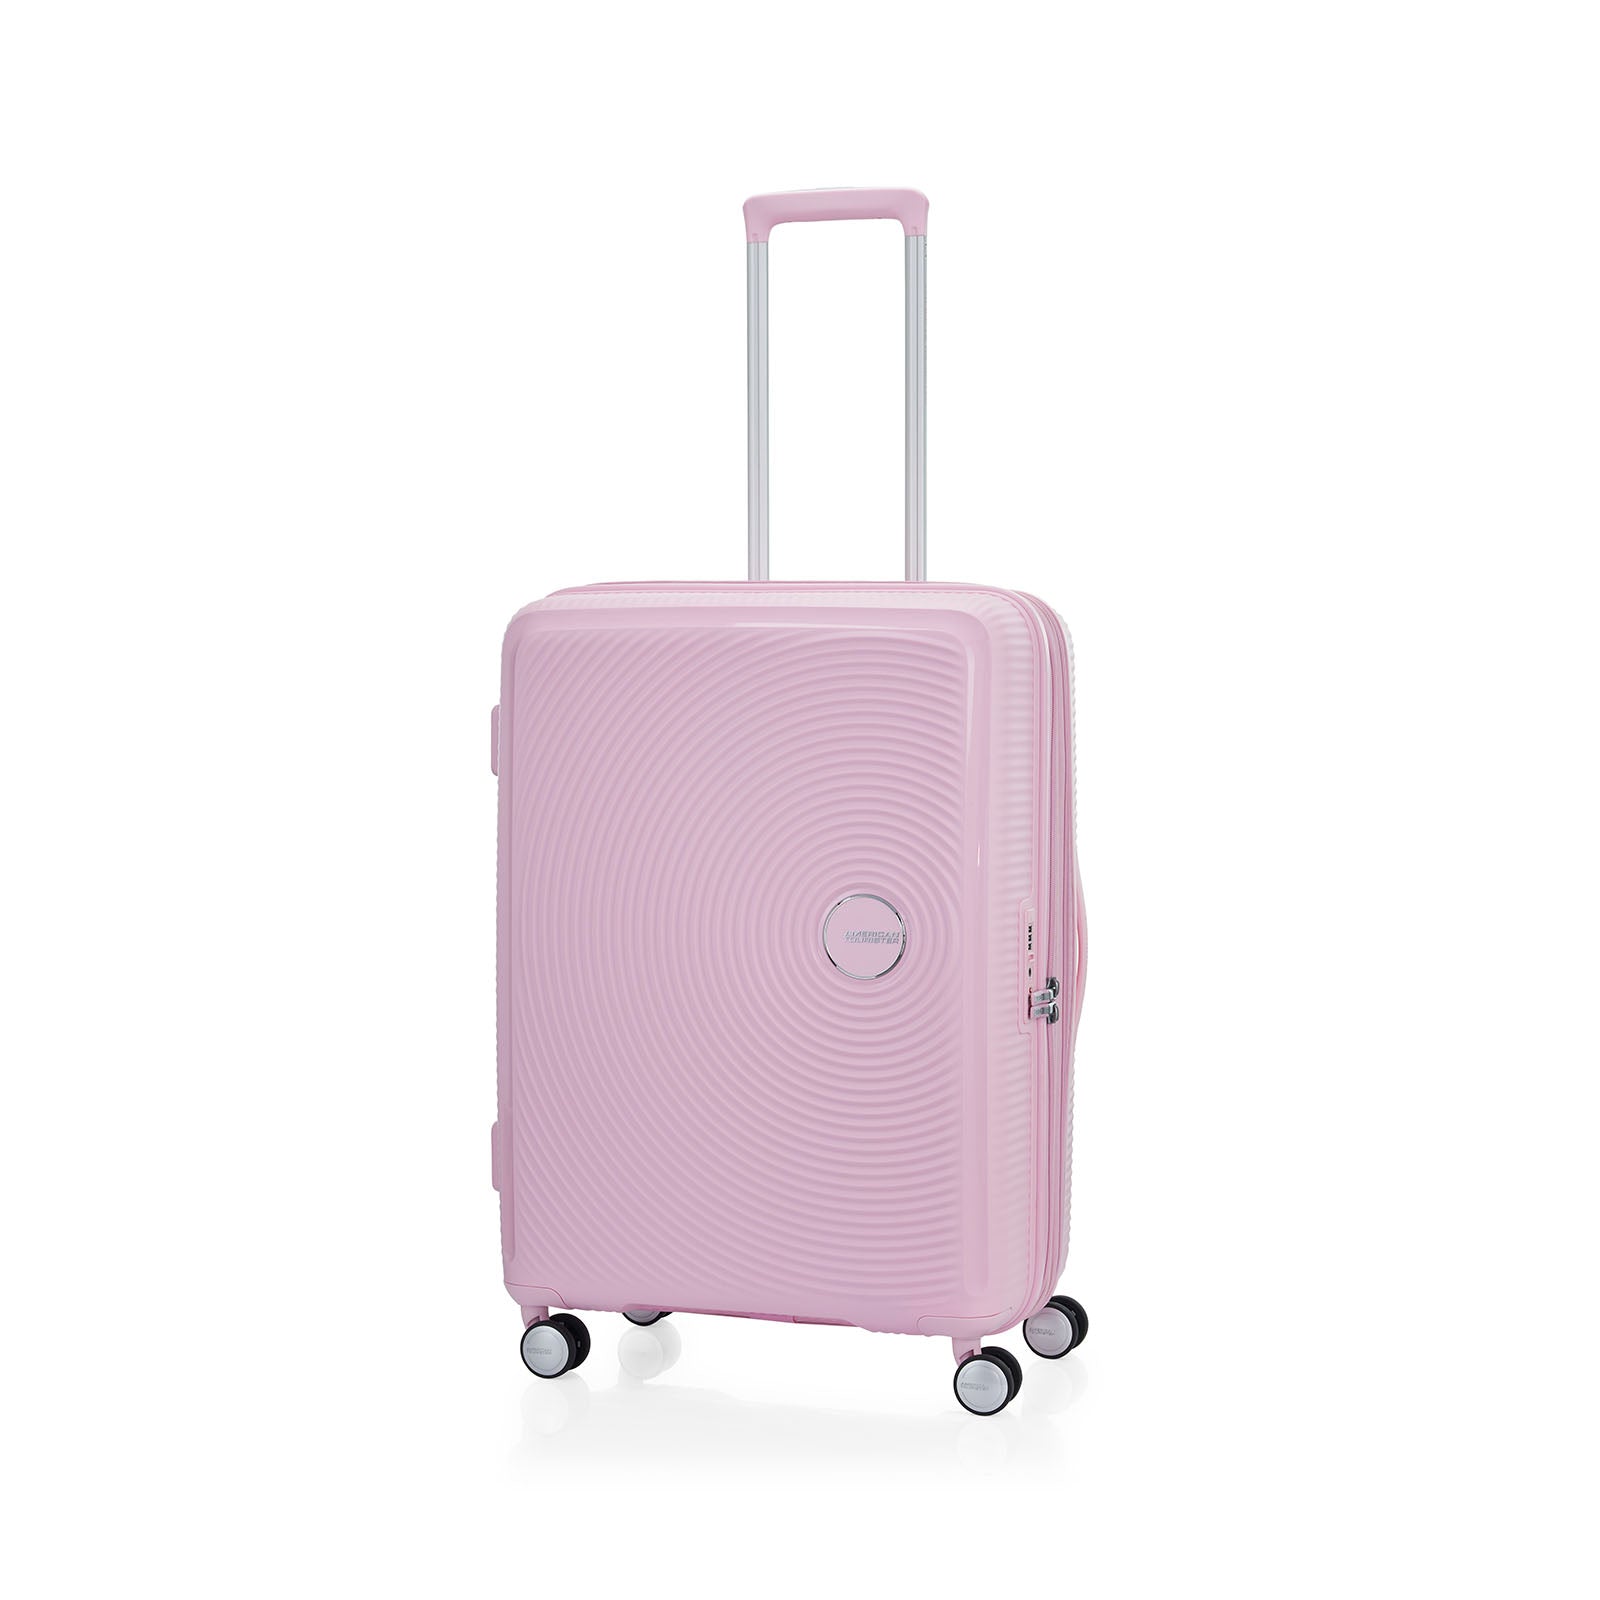 American-Tourister-Curio-2-69cm-Suitcase-Fresh-Pink-Front-Angle